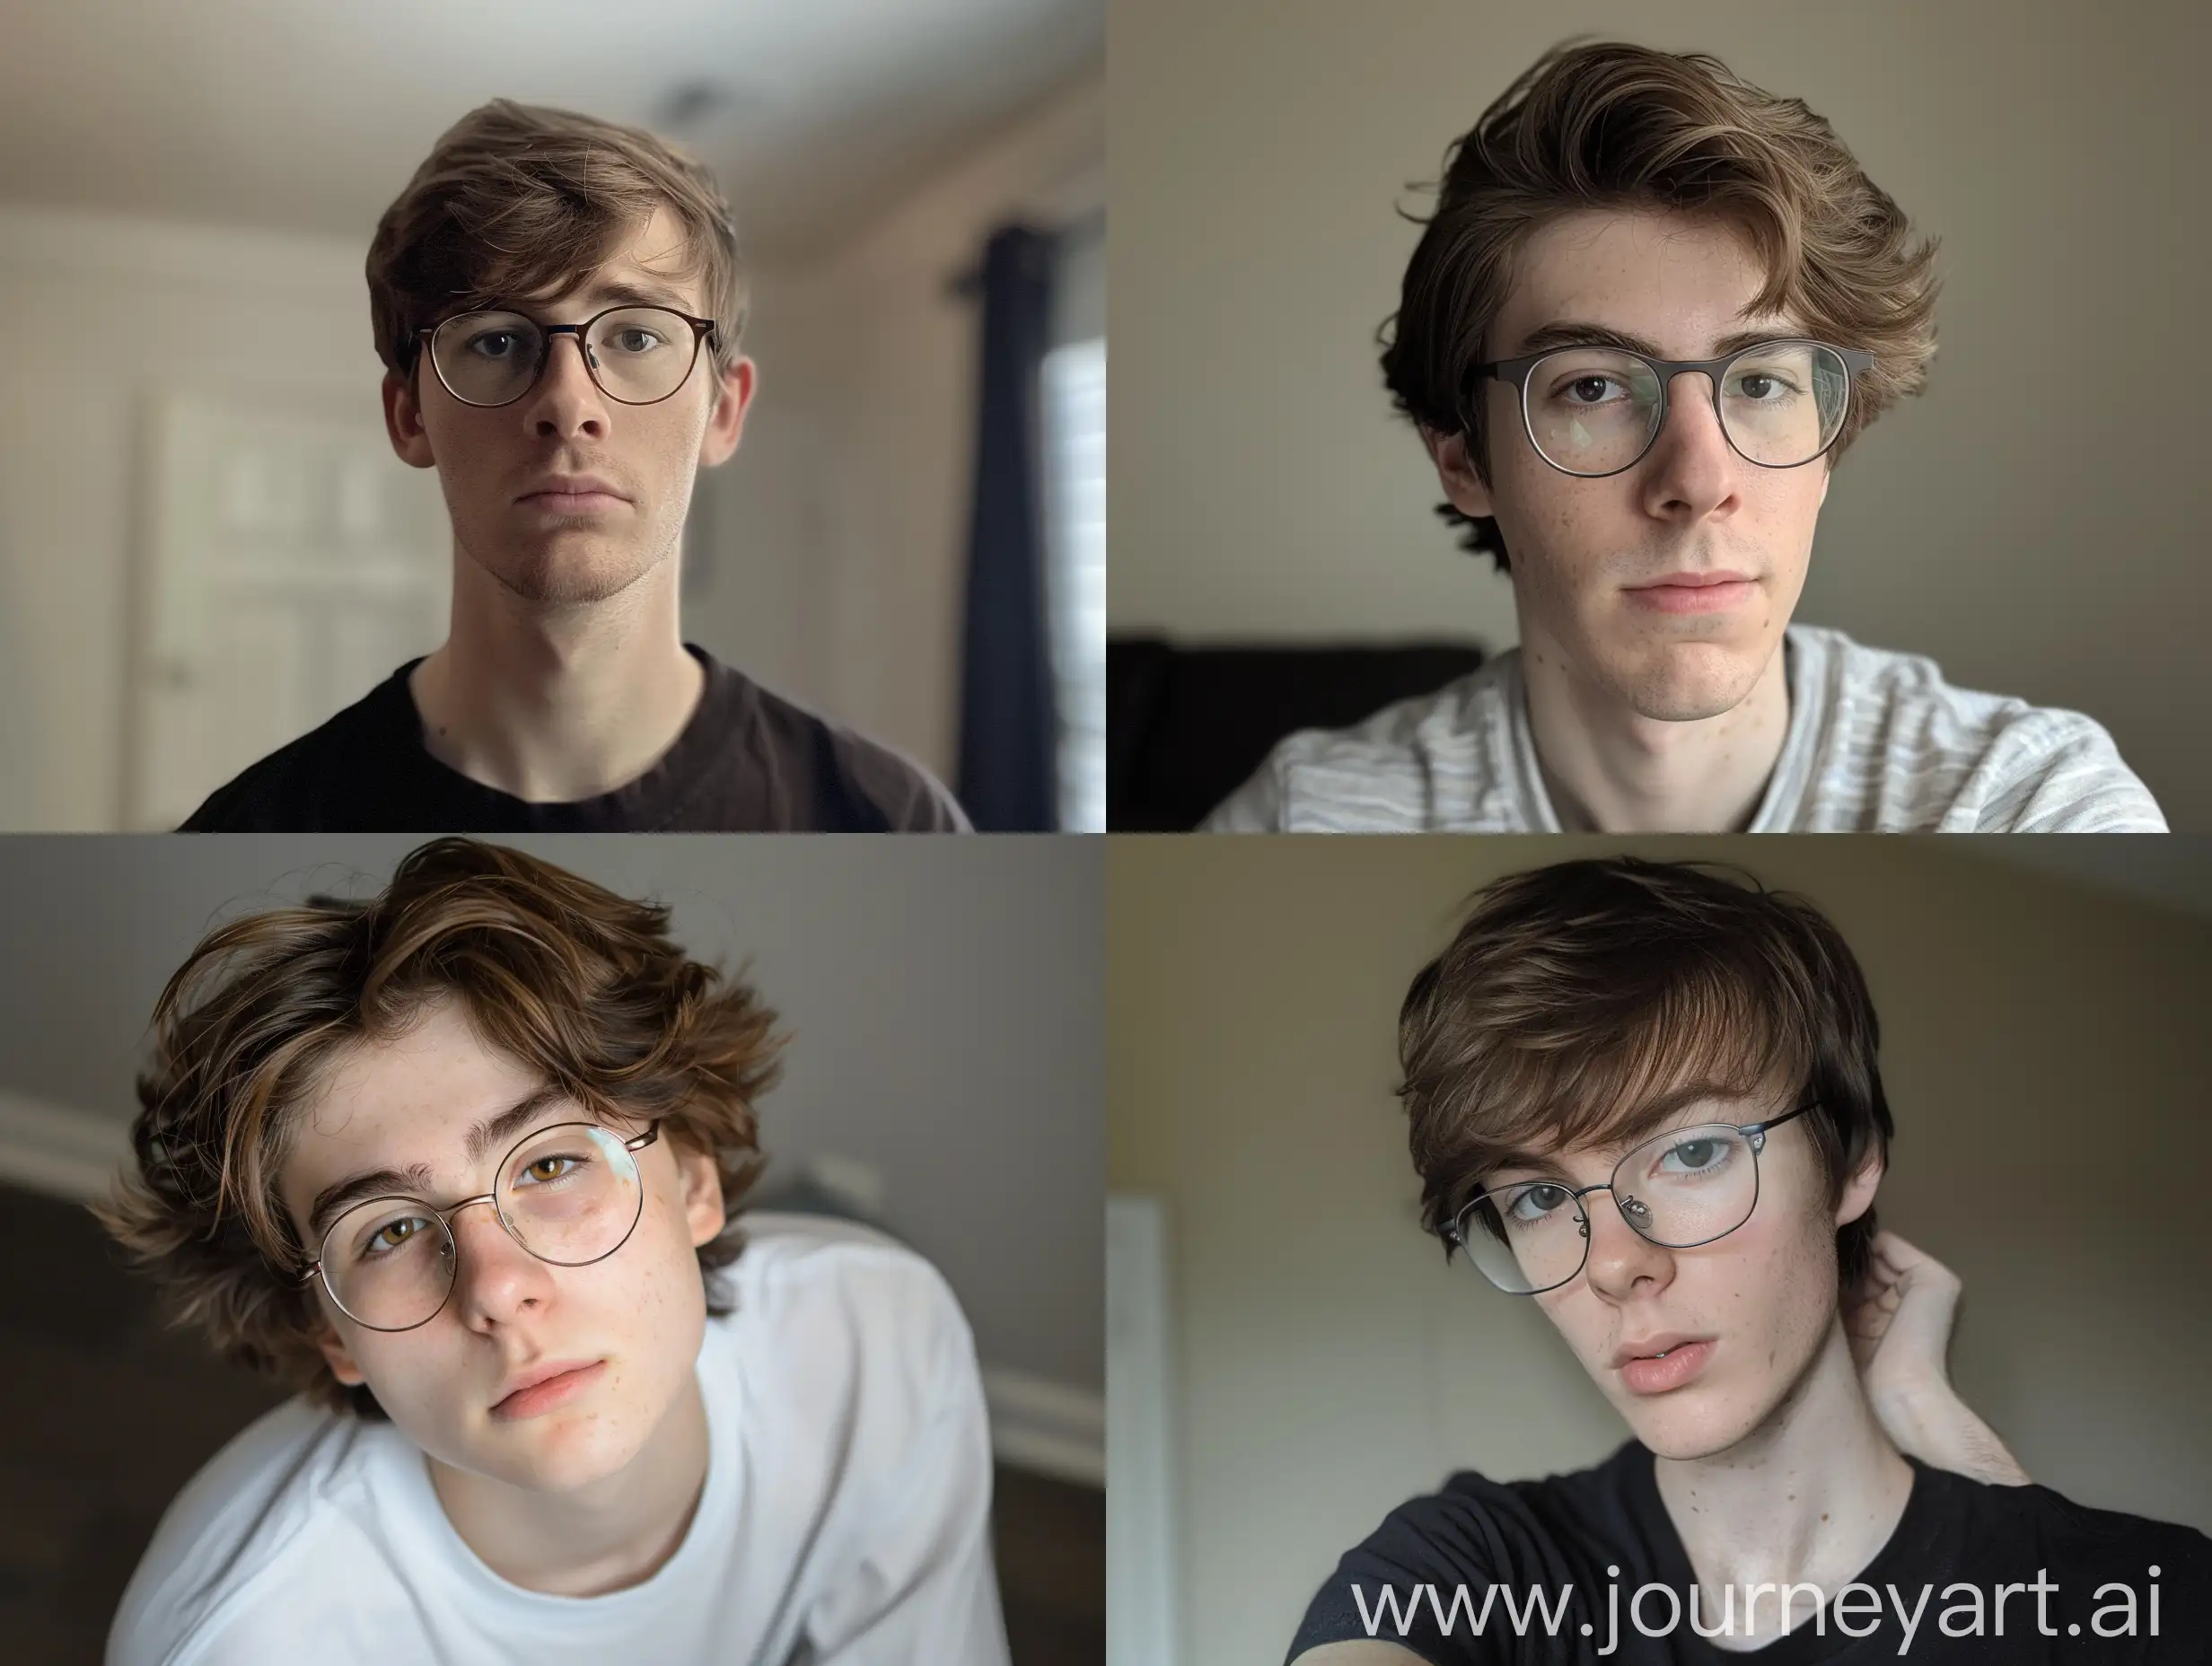 BrownHaired-Male-with-Glasses-Emerging-from-Hells-Abyss